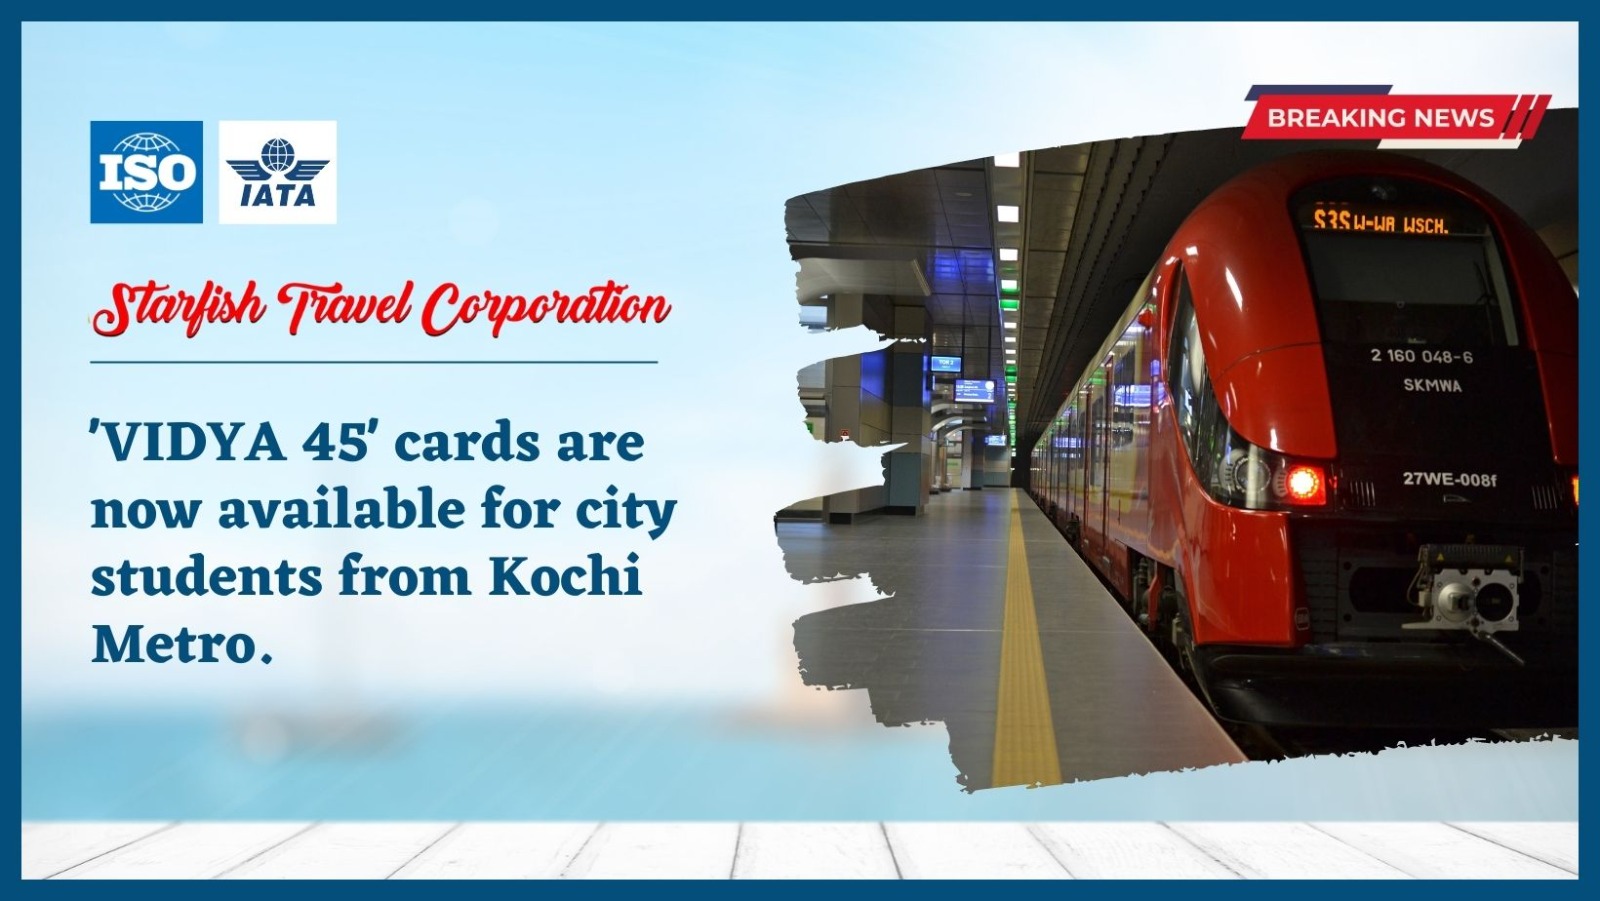 You are currently viewing ‘VIDYA 45’ cards are now available for city students from Kochi Metro.